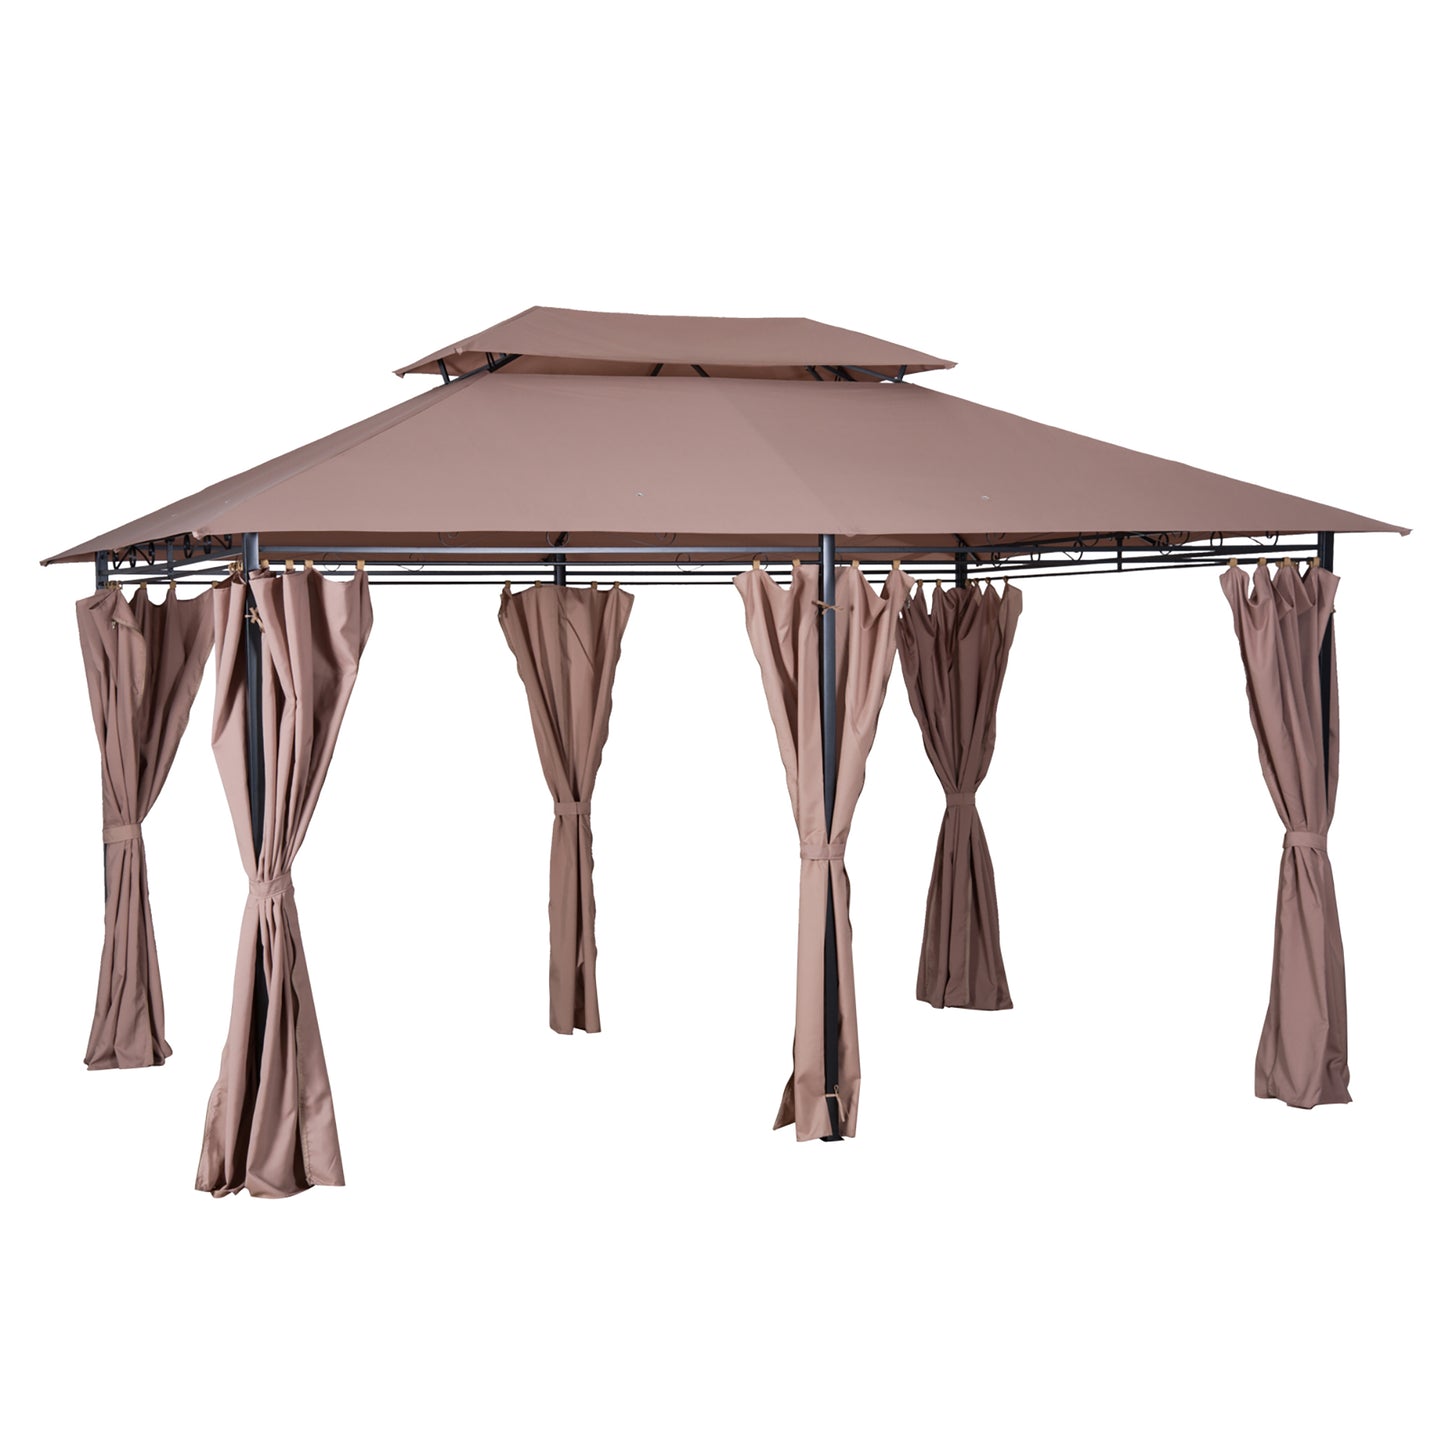 Outsunny 4m x 3(m) Metal Gazebo Canopy Party Tent Garden Pavillion Patio Shelter Pavilion with Curtains Sidewalls Brown